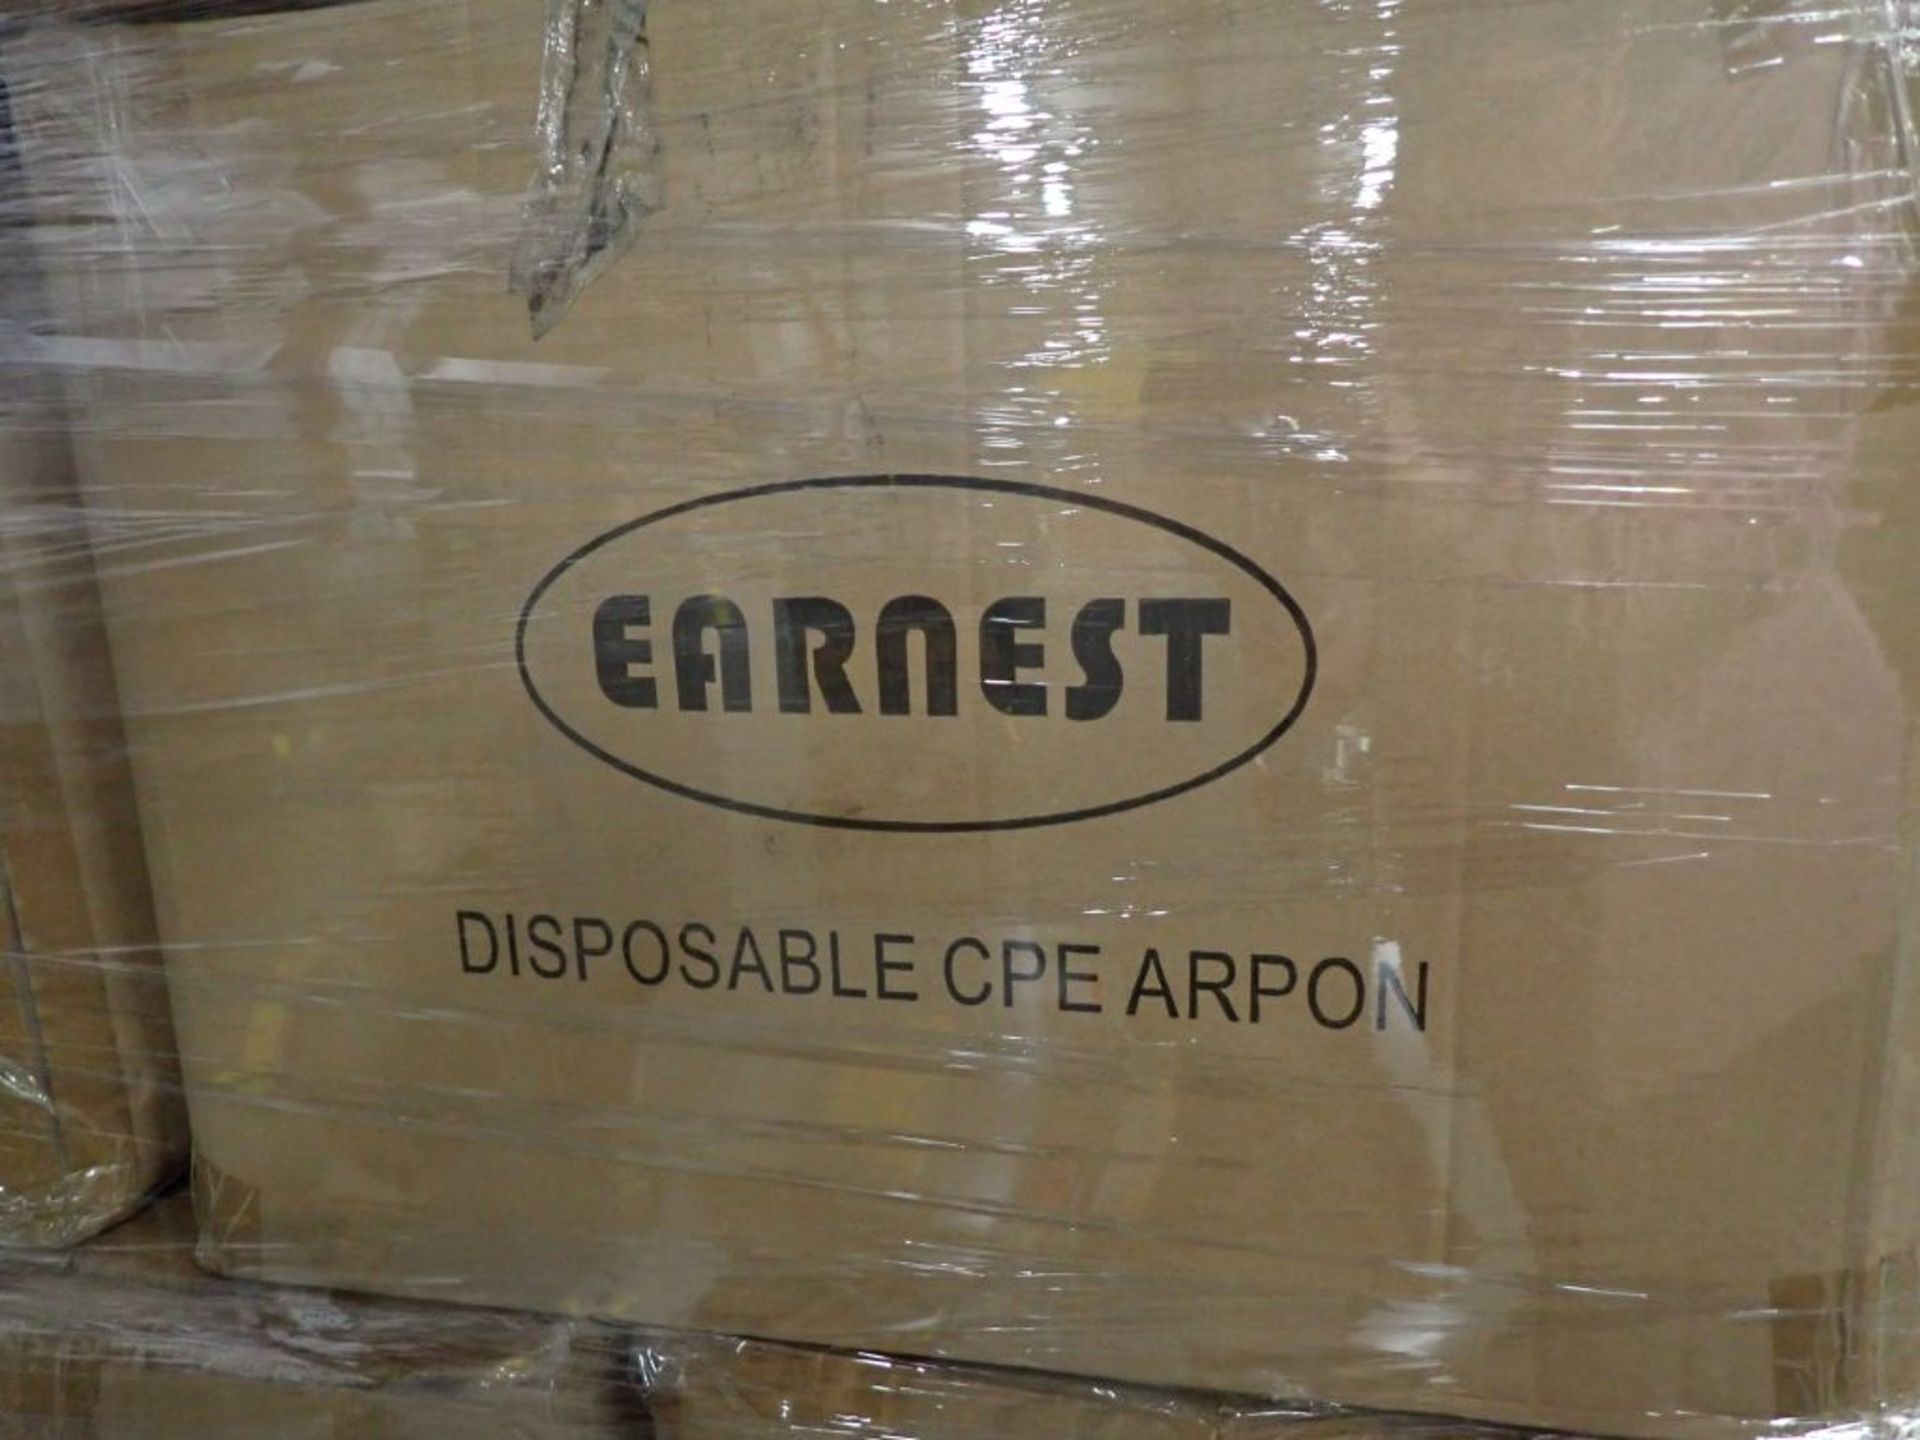 Lot of (6,400) Earnest Disposable CPE Aprons - Image 2 of 4